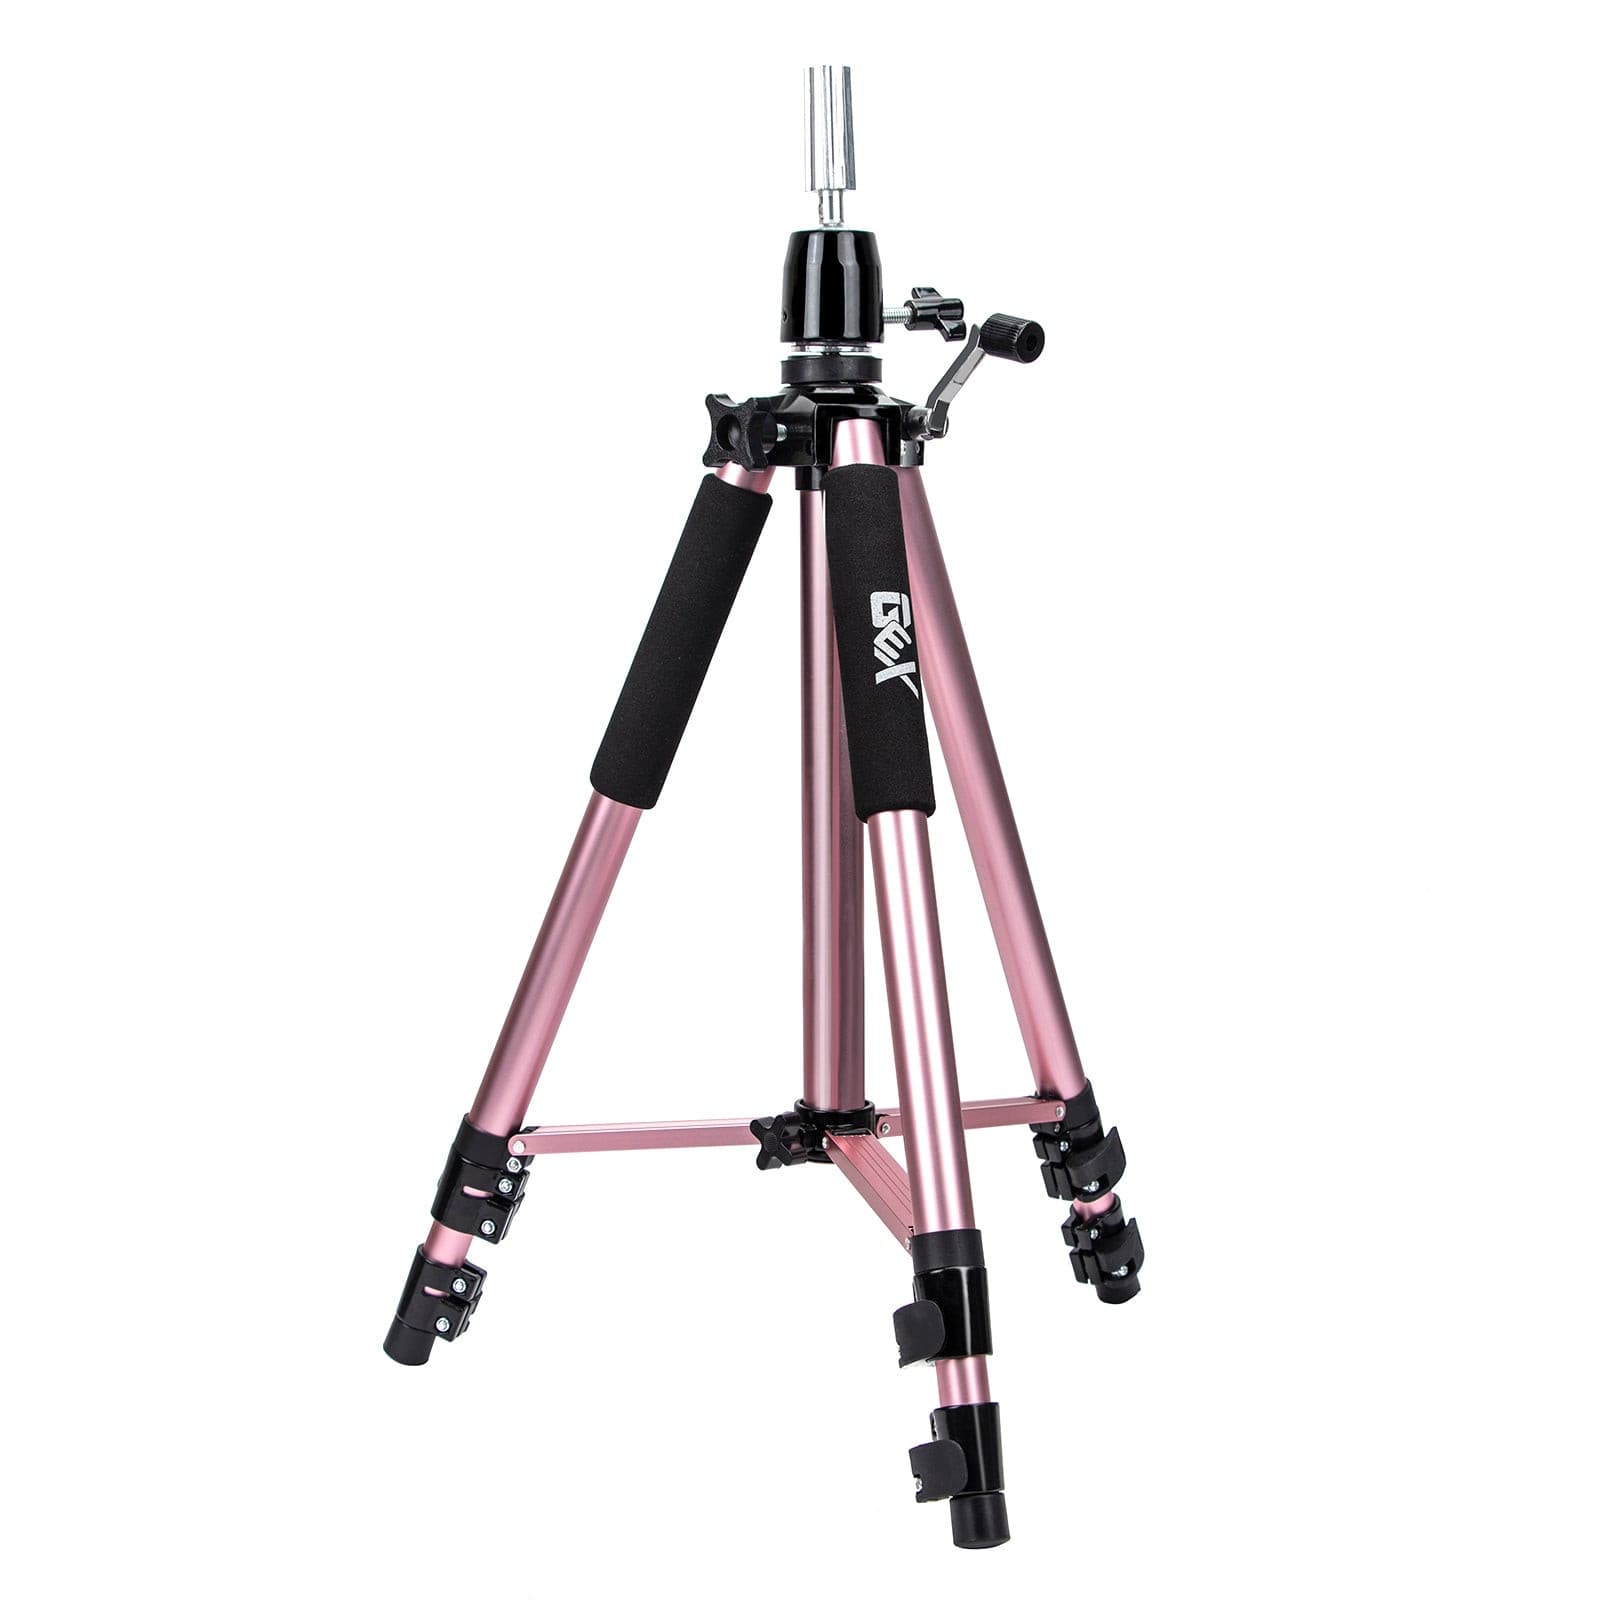  GEX Mannequin Tripod Top Piece Backup for Canvas Block Head  Cosmetology Training Doll Manikin Head : Arts, Crafts & Sewing